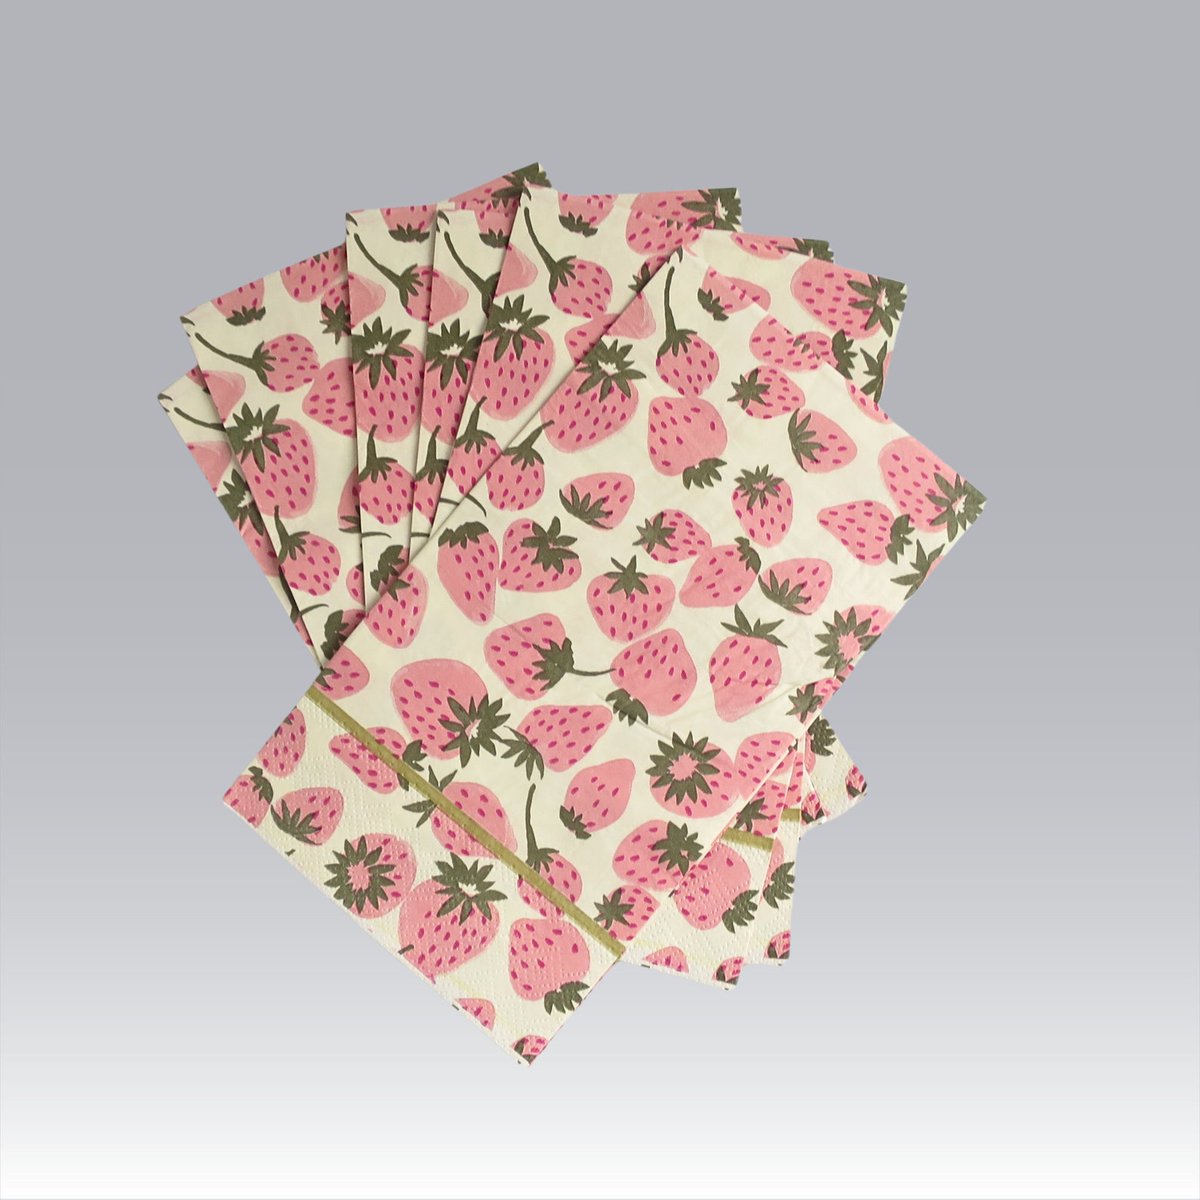 #PinkStrawberry Banquet Napkins for #Decoupage, Crafts or Tablescaping etsy.me/3y9E0g4 gorgeous pattern for crafts or serving #SMILEtt23 #Wiseshopper #EtsyteamUnity bit.ly/SwirlingO11e